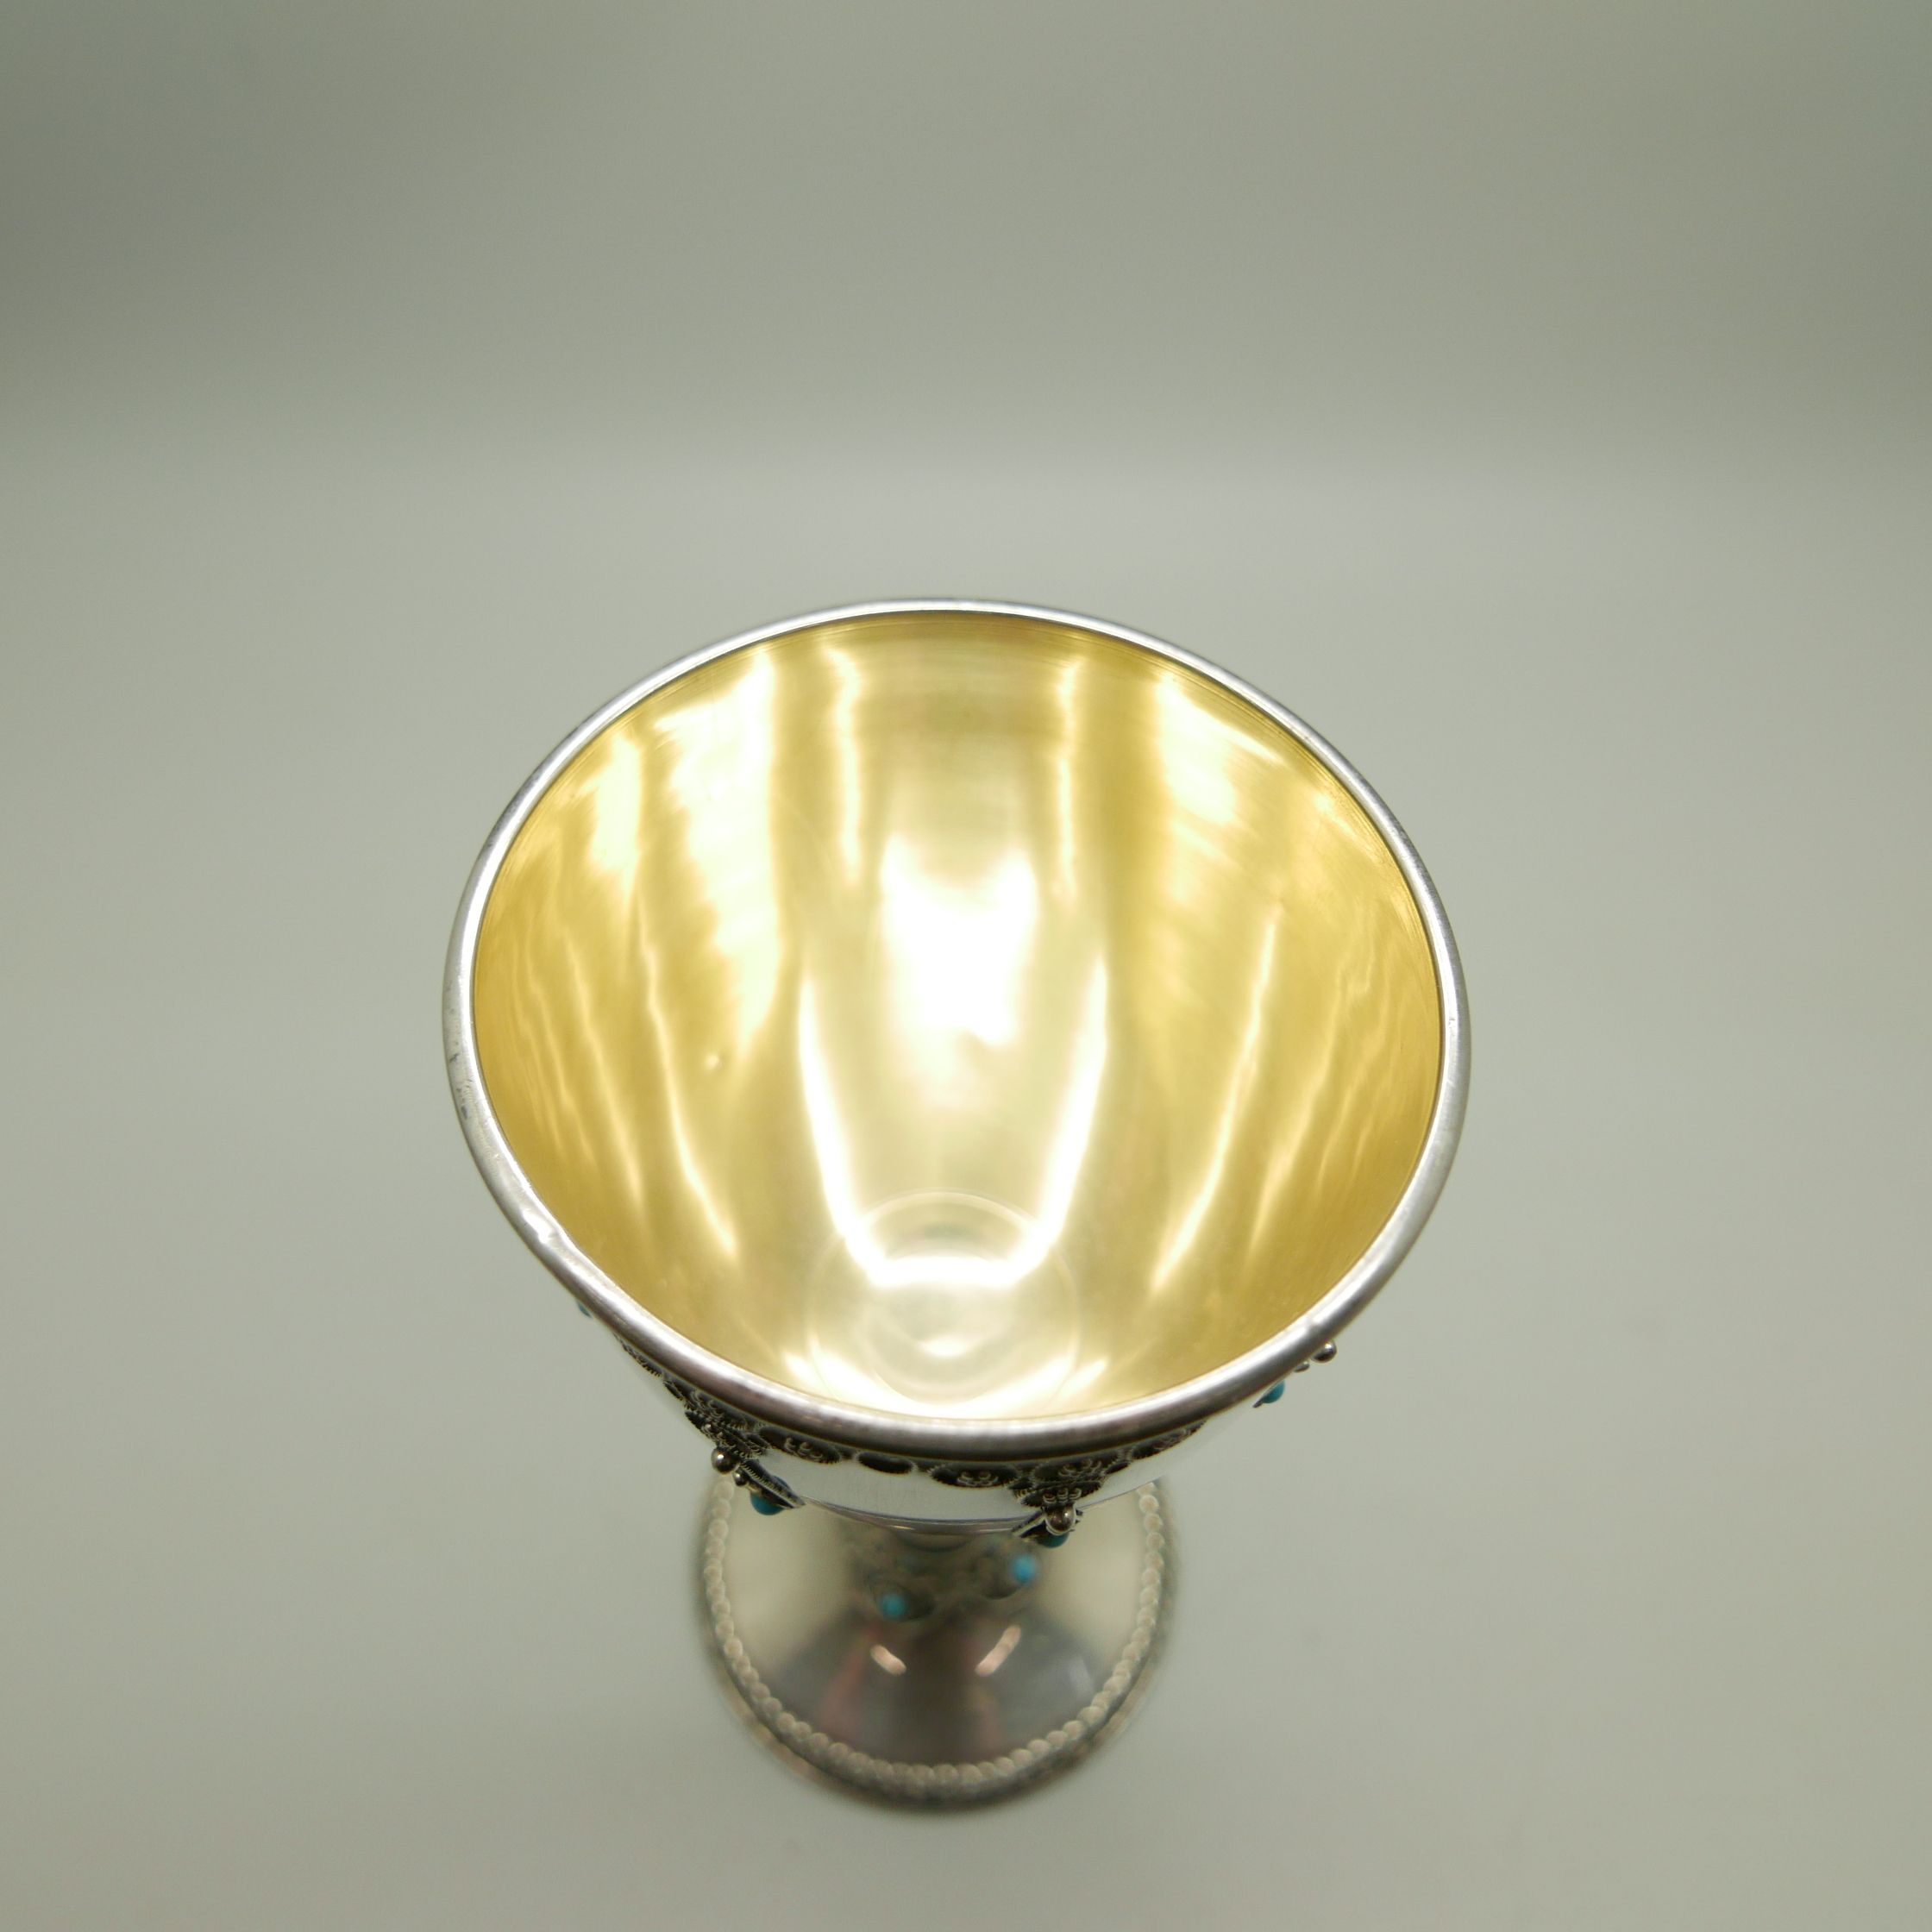 A Stanetzky 20th Century silver and turquoise goblet with beaded detail, 97.6g, 14.5cm - Image 4 of 6